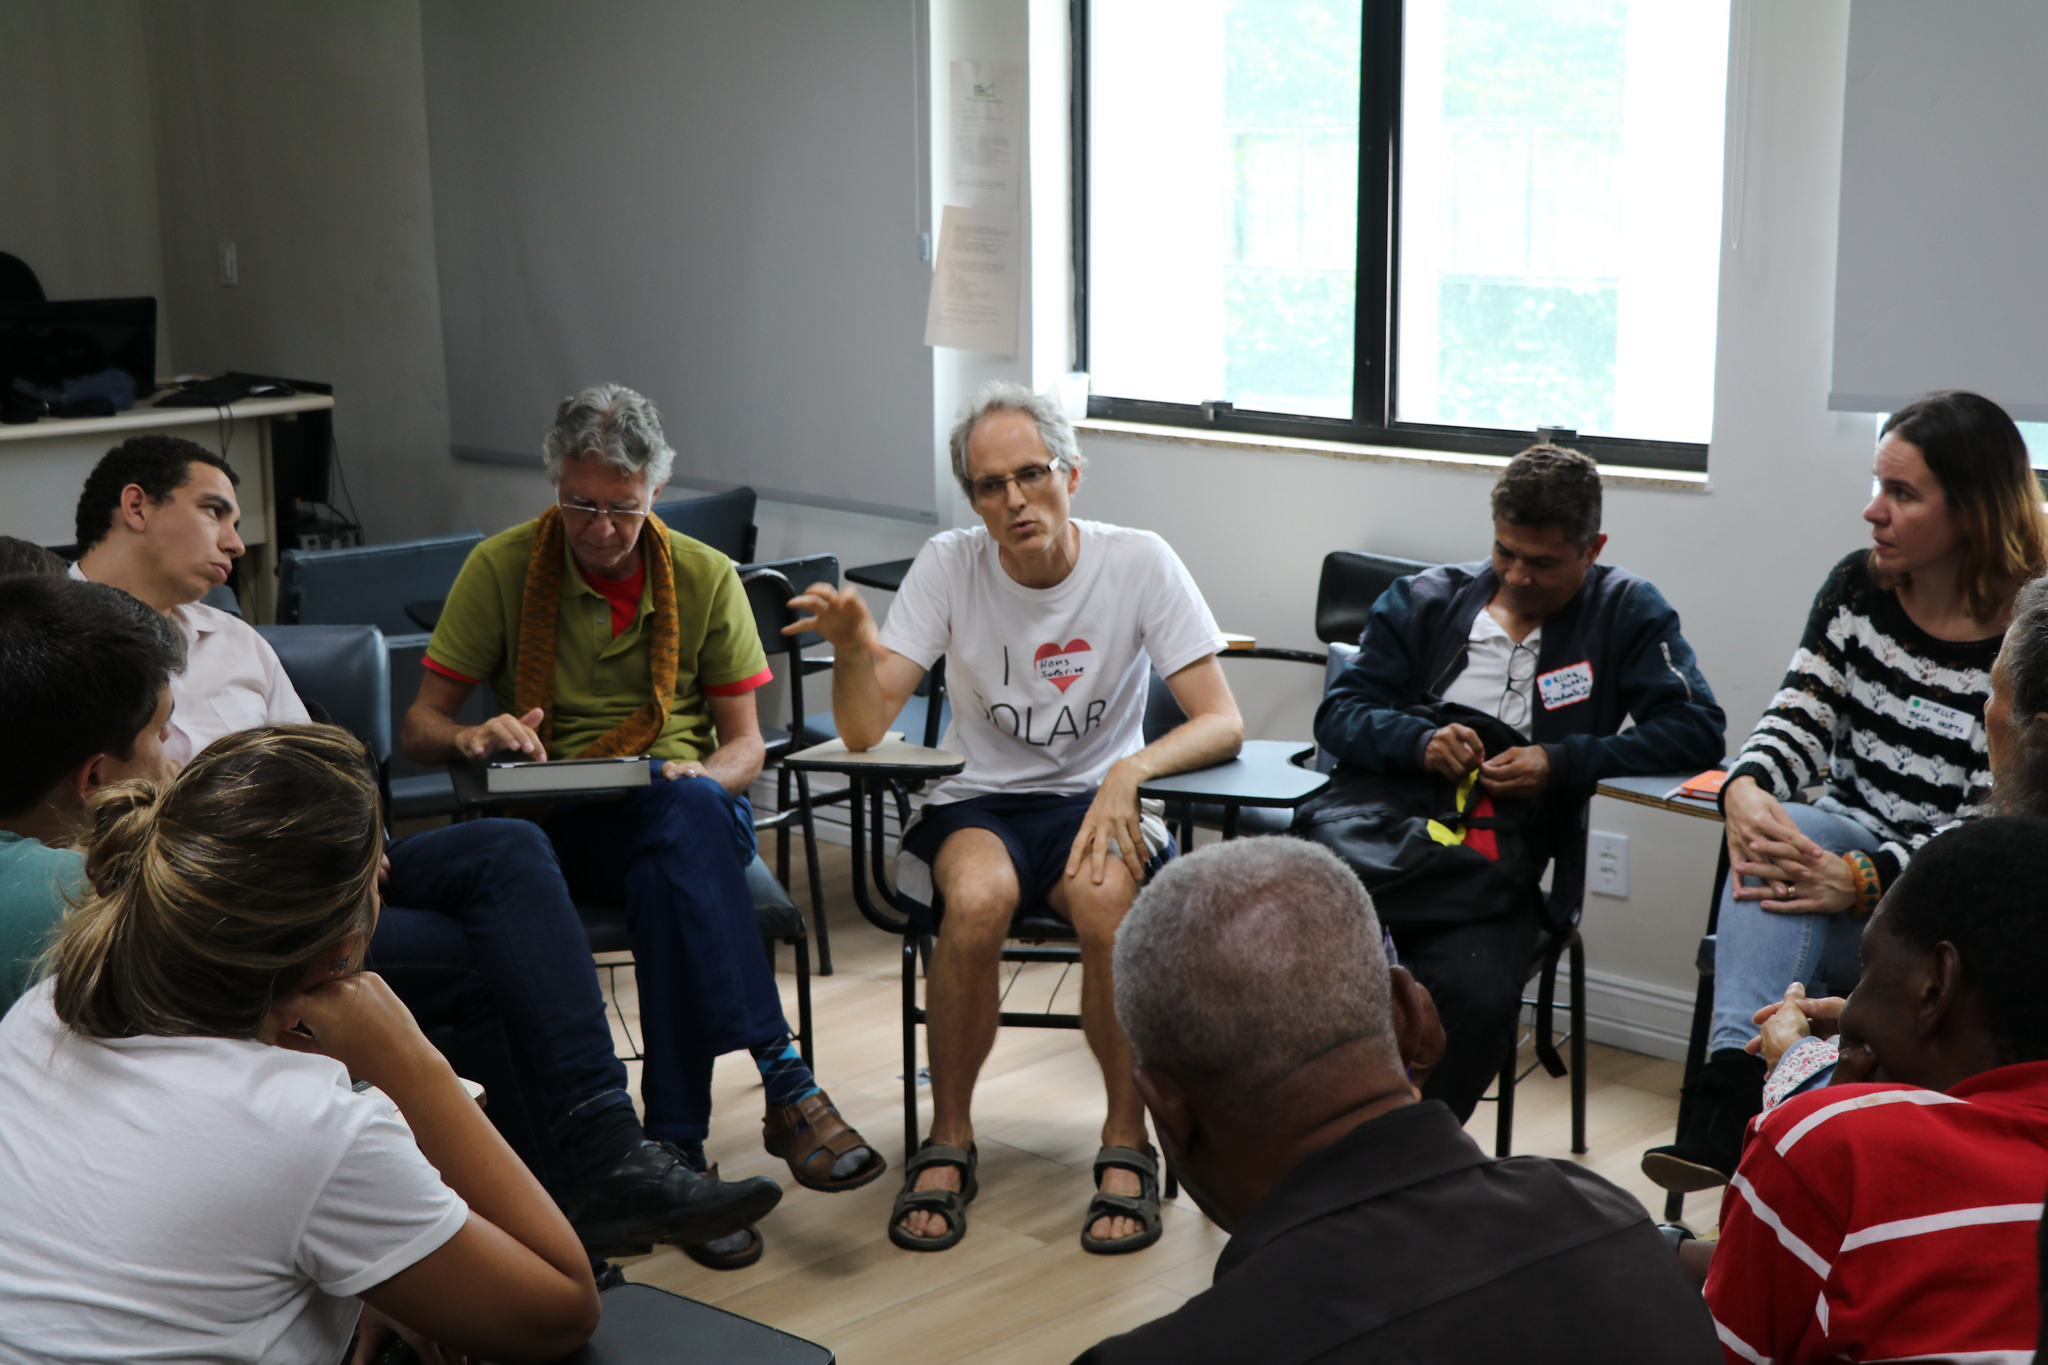 Sustainable Favela Network 2nd Annual Meet-Up Strengthens Bonds